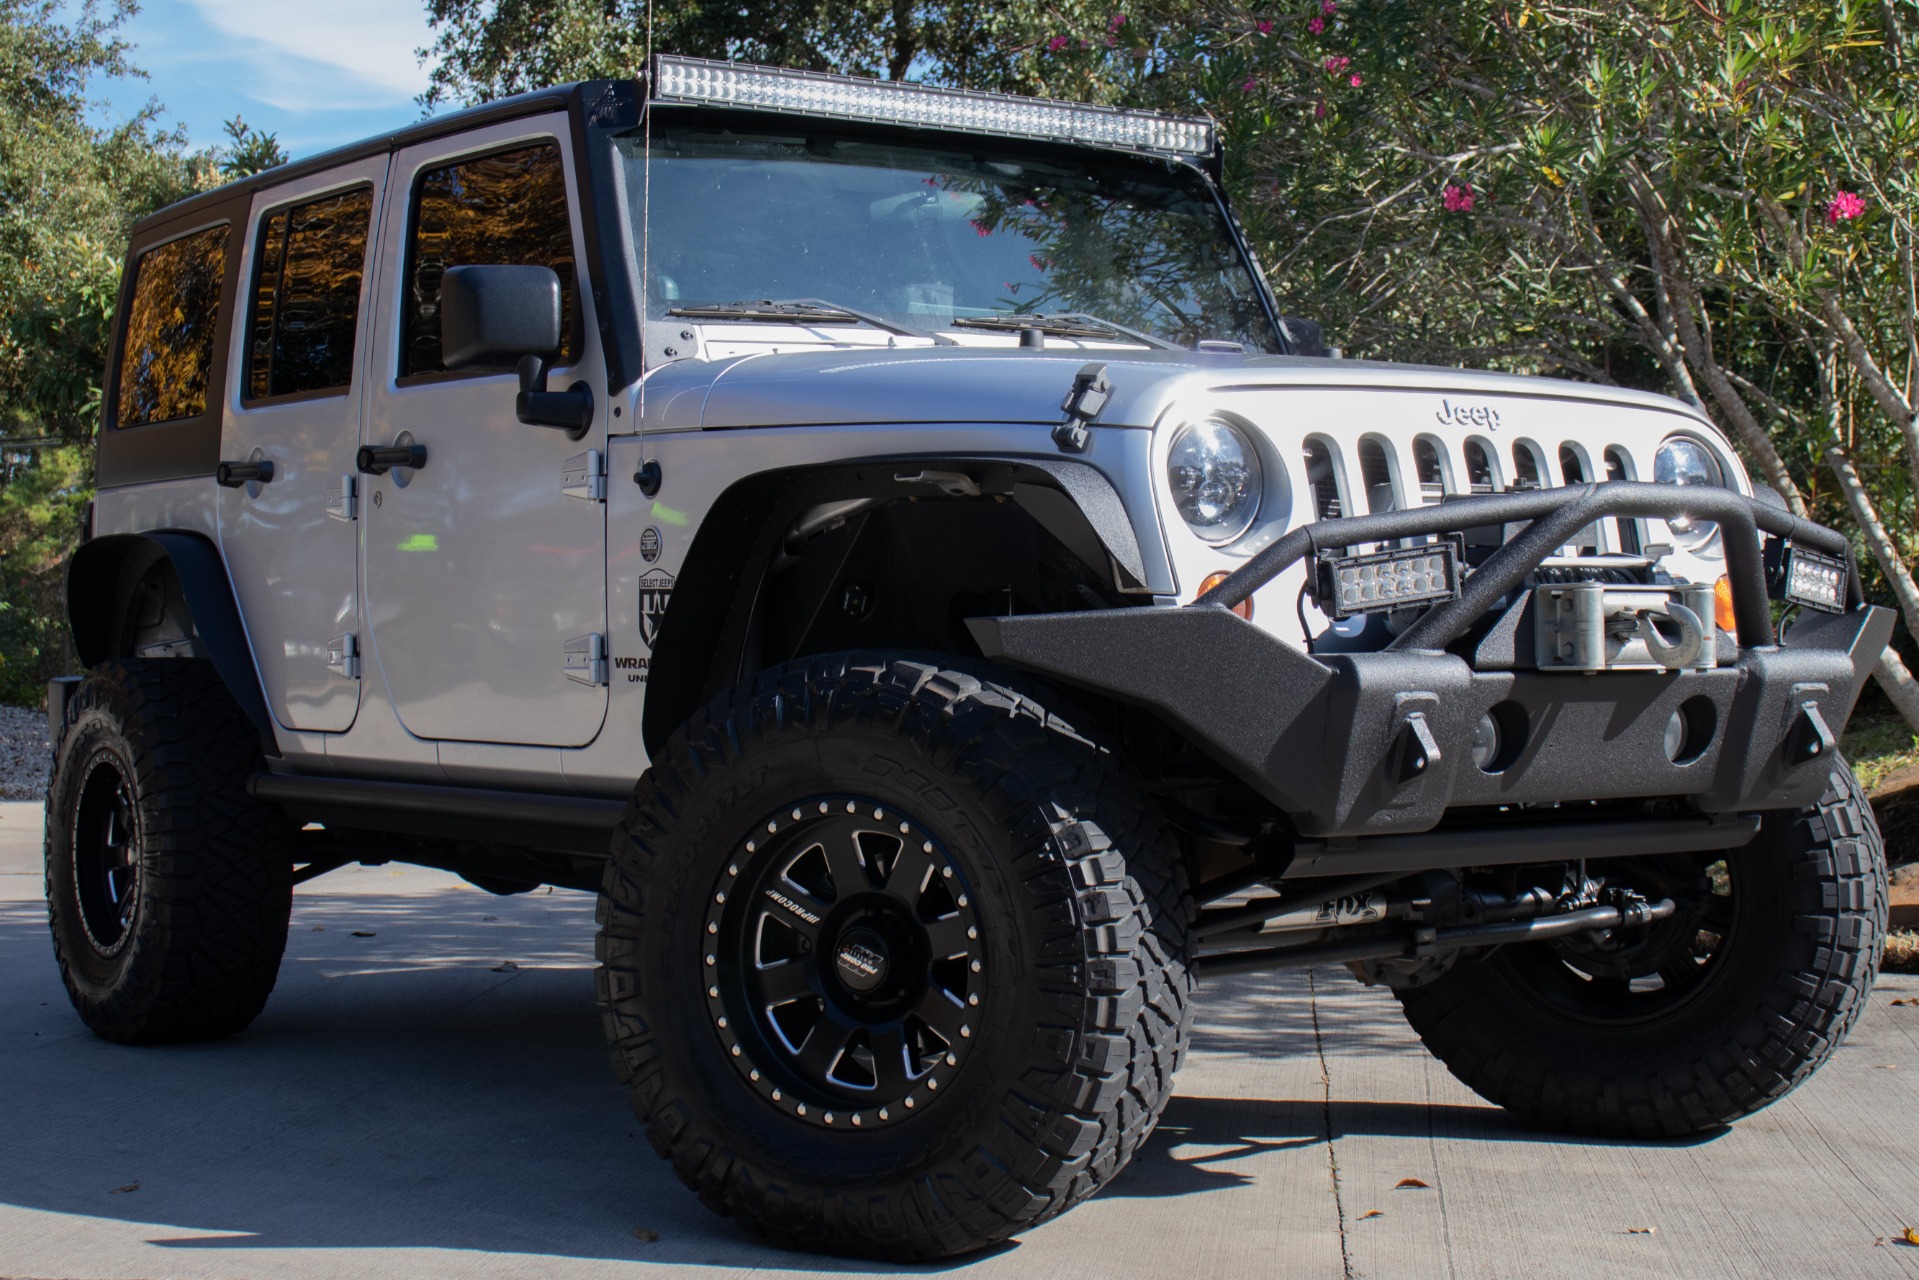 Used 2008 Jeep Wrangler Unlimited X For Sale ($22,995) | Select Jeeps Inc.  Stock #587057